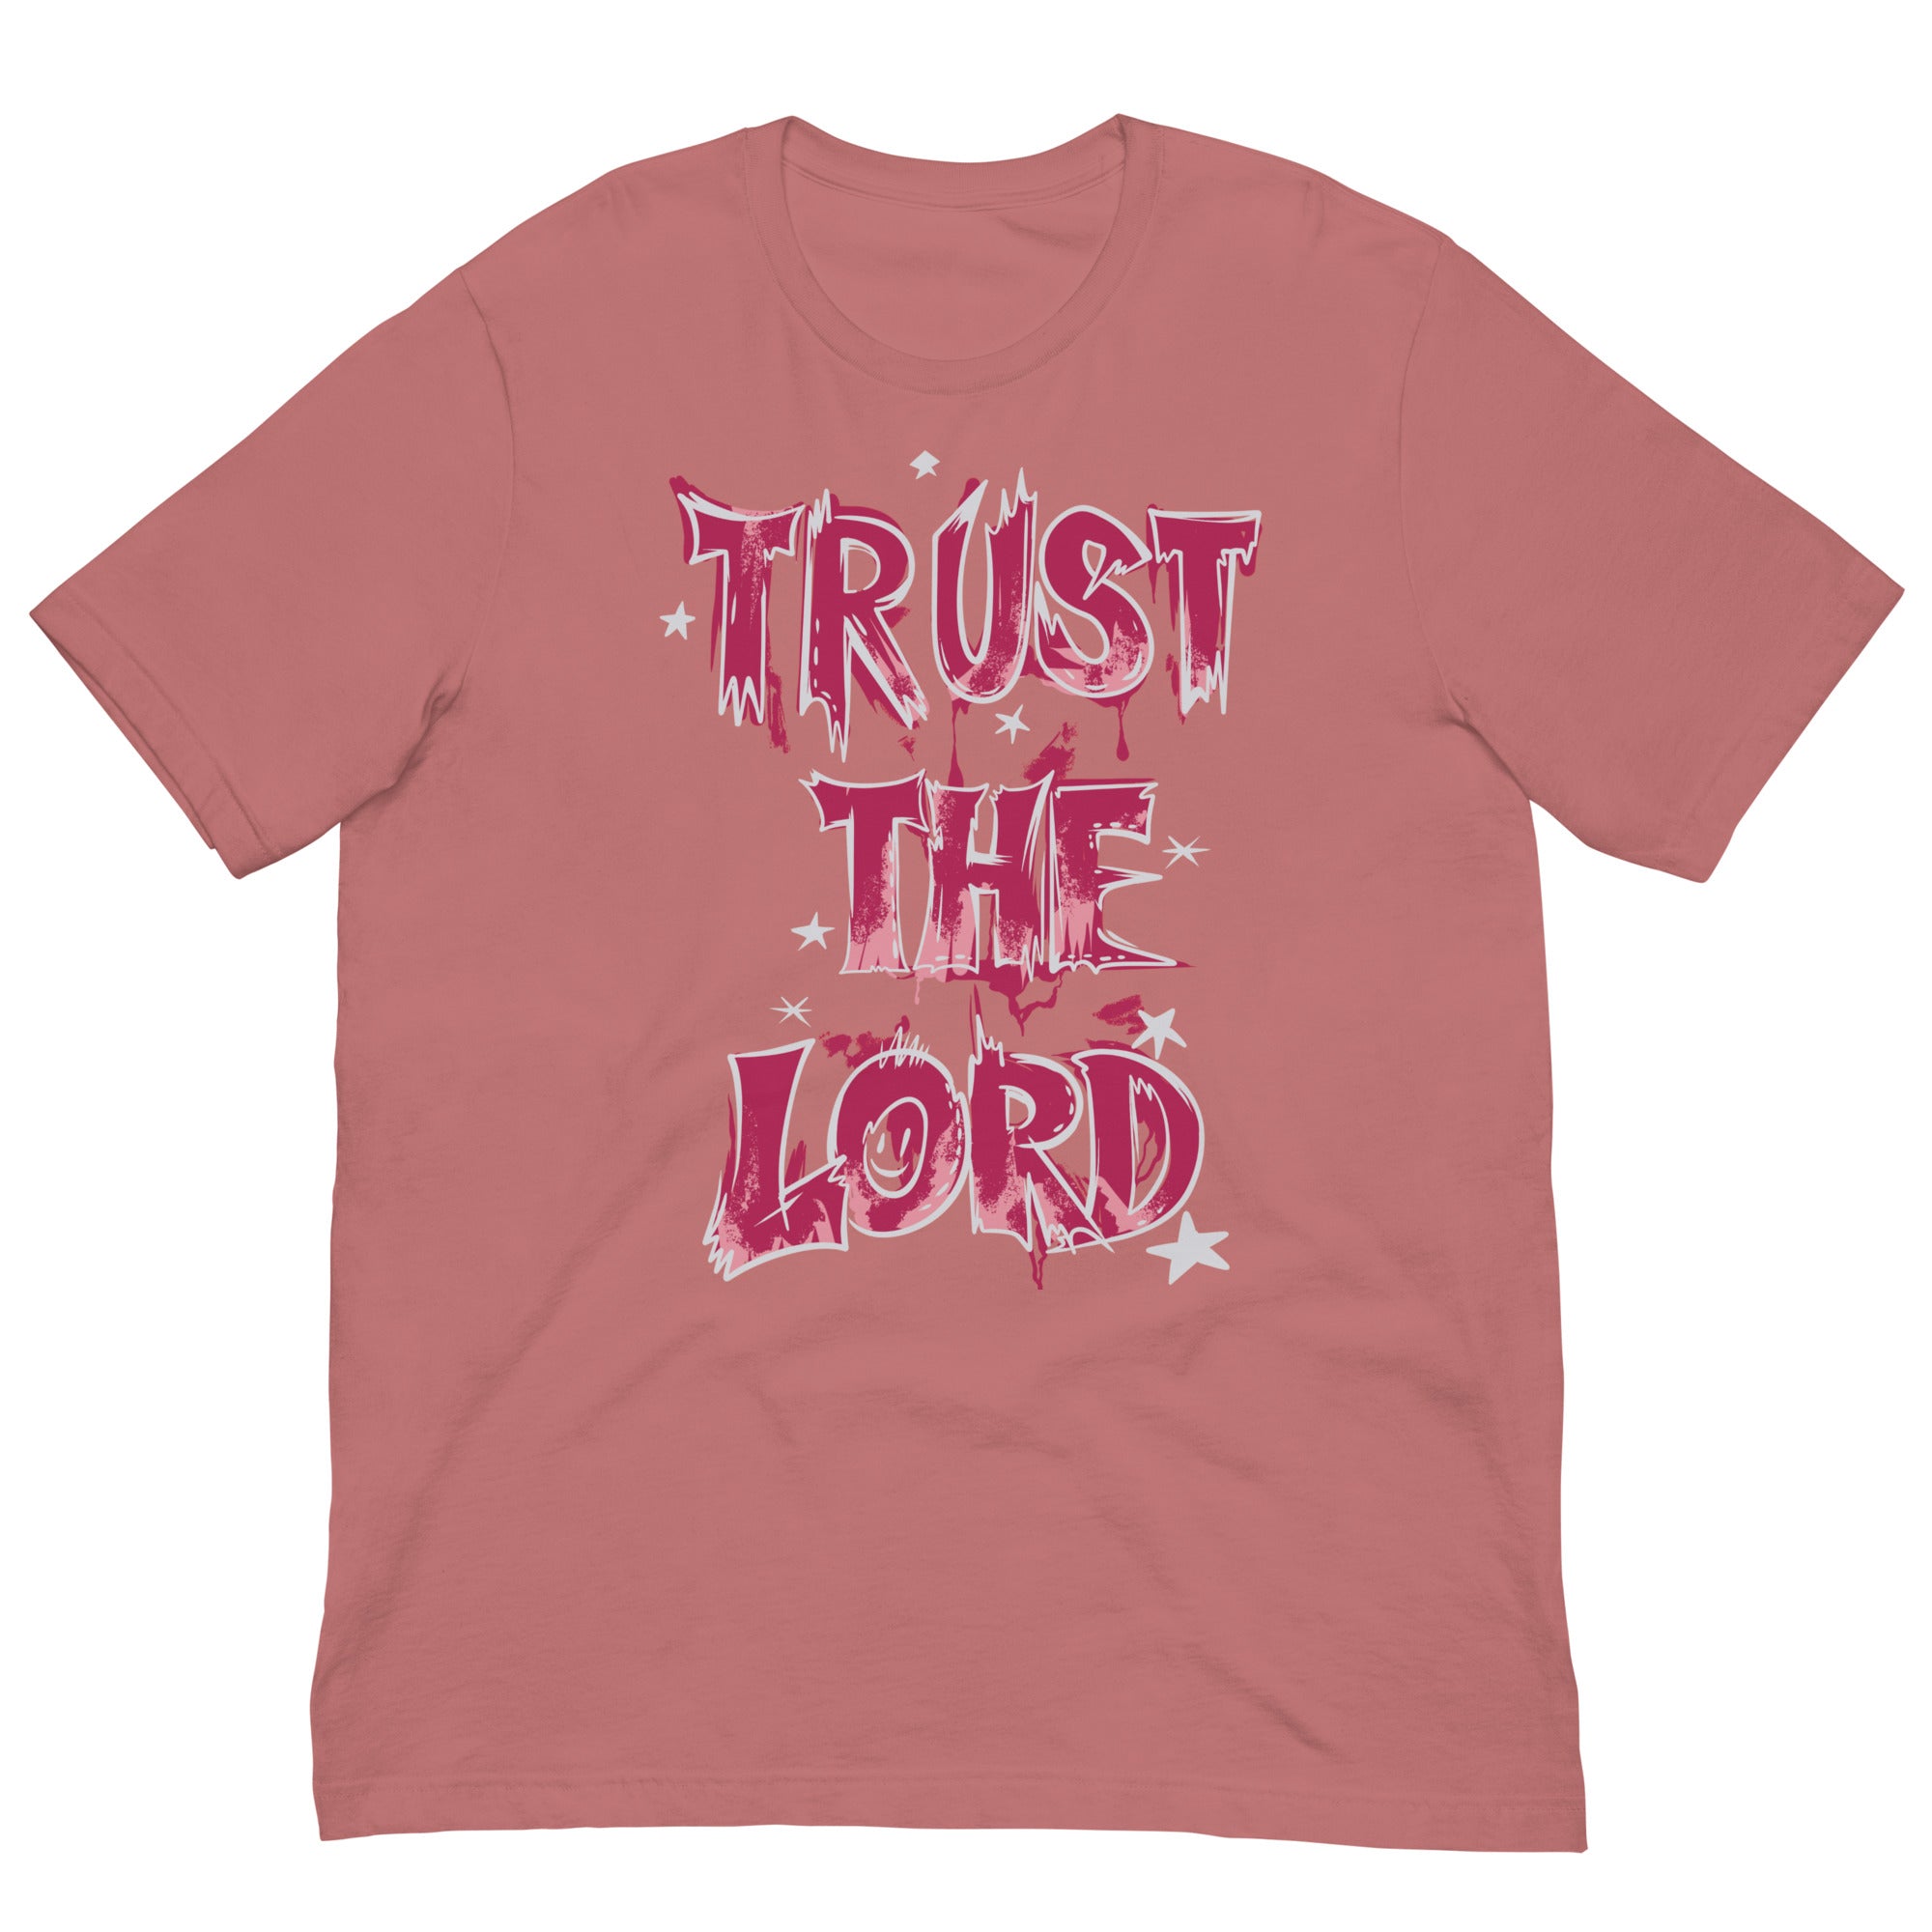 Trust the LORD Unisex t-shirt